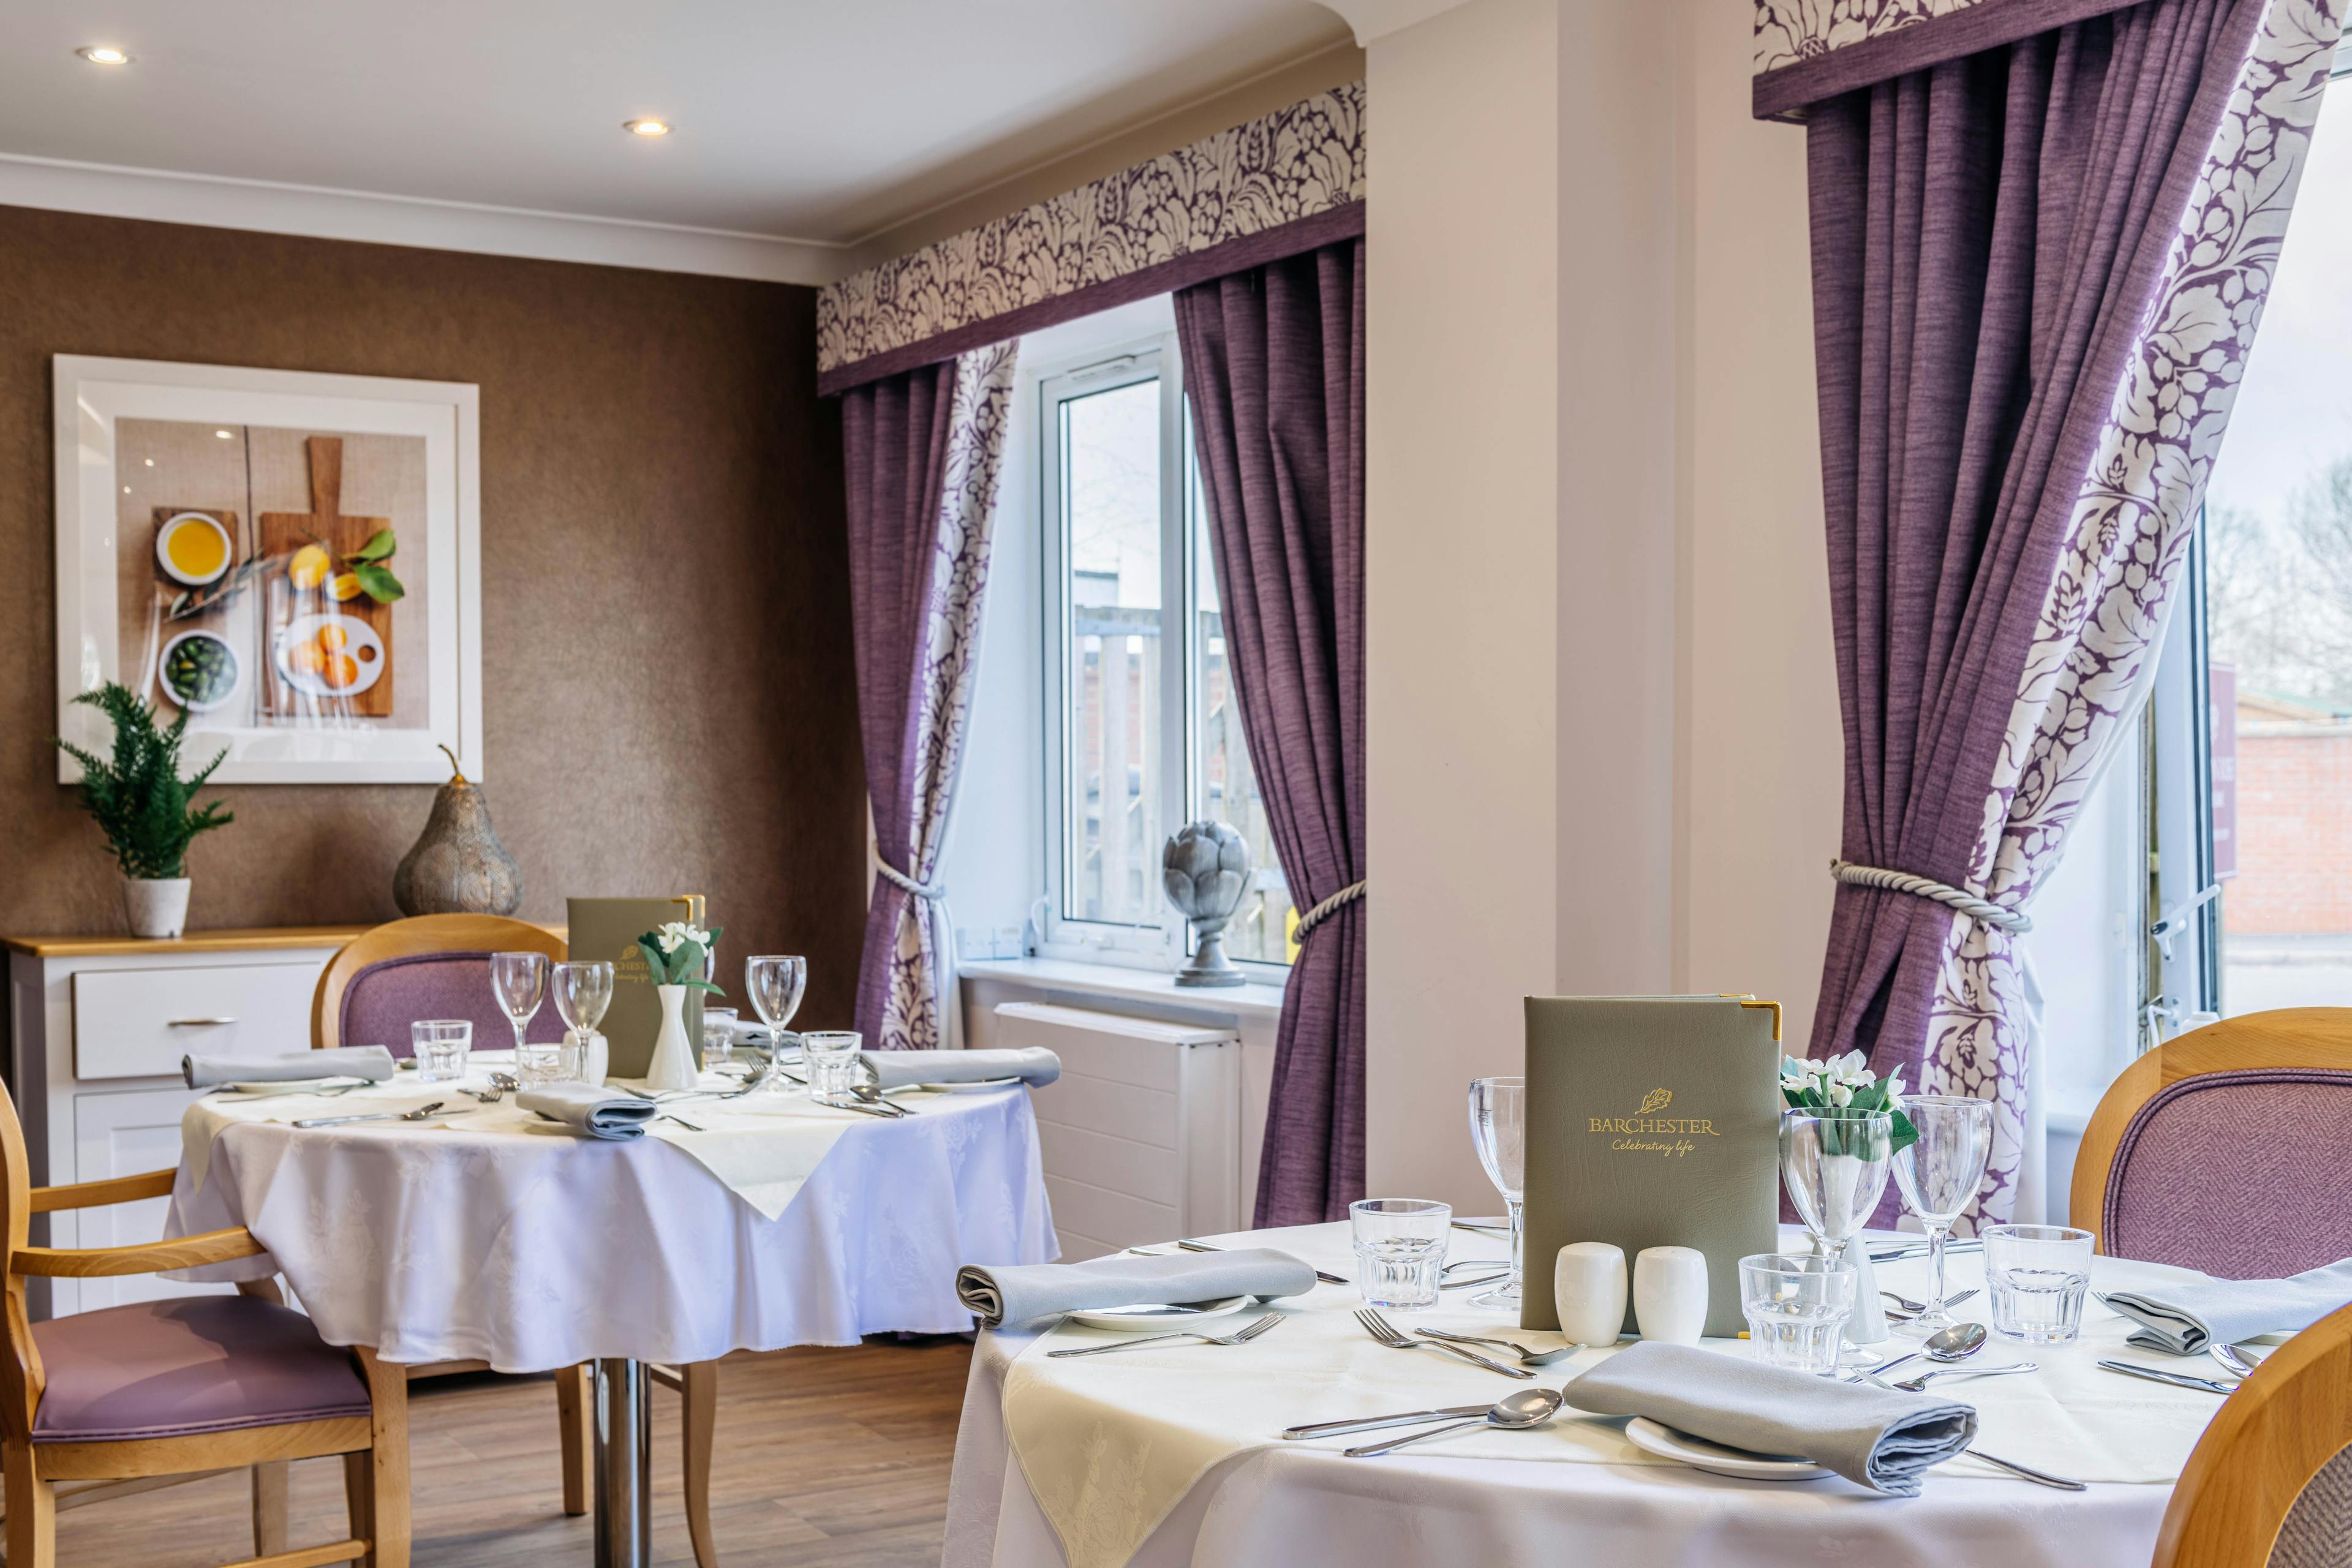 Dining Room of Lawton Rise Care Home in Stoke-on-Trent, Staffordshire